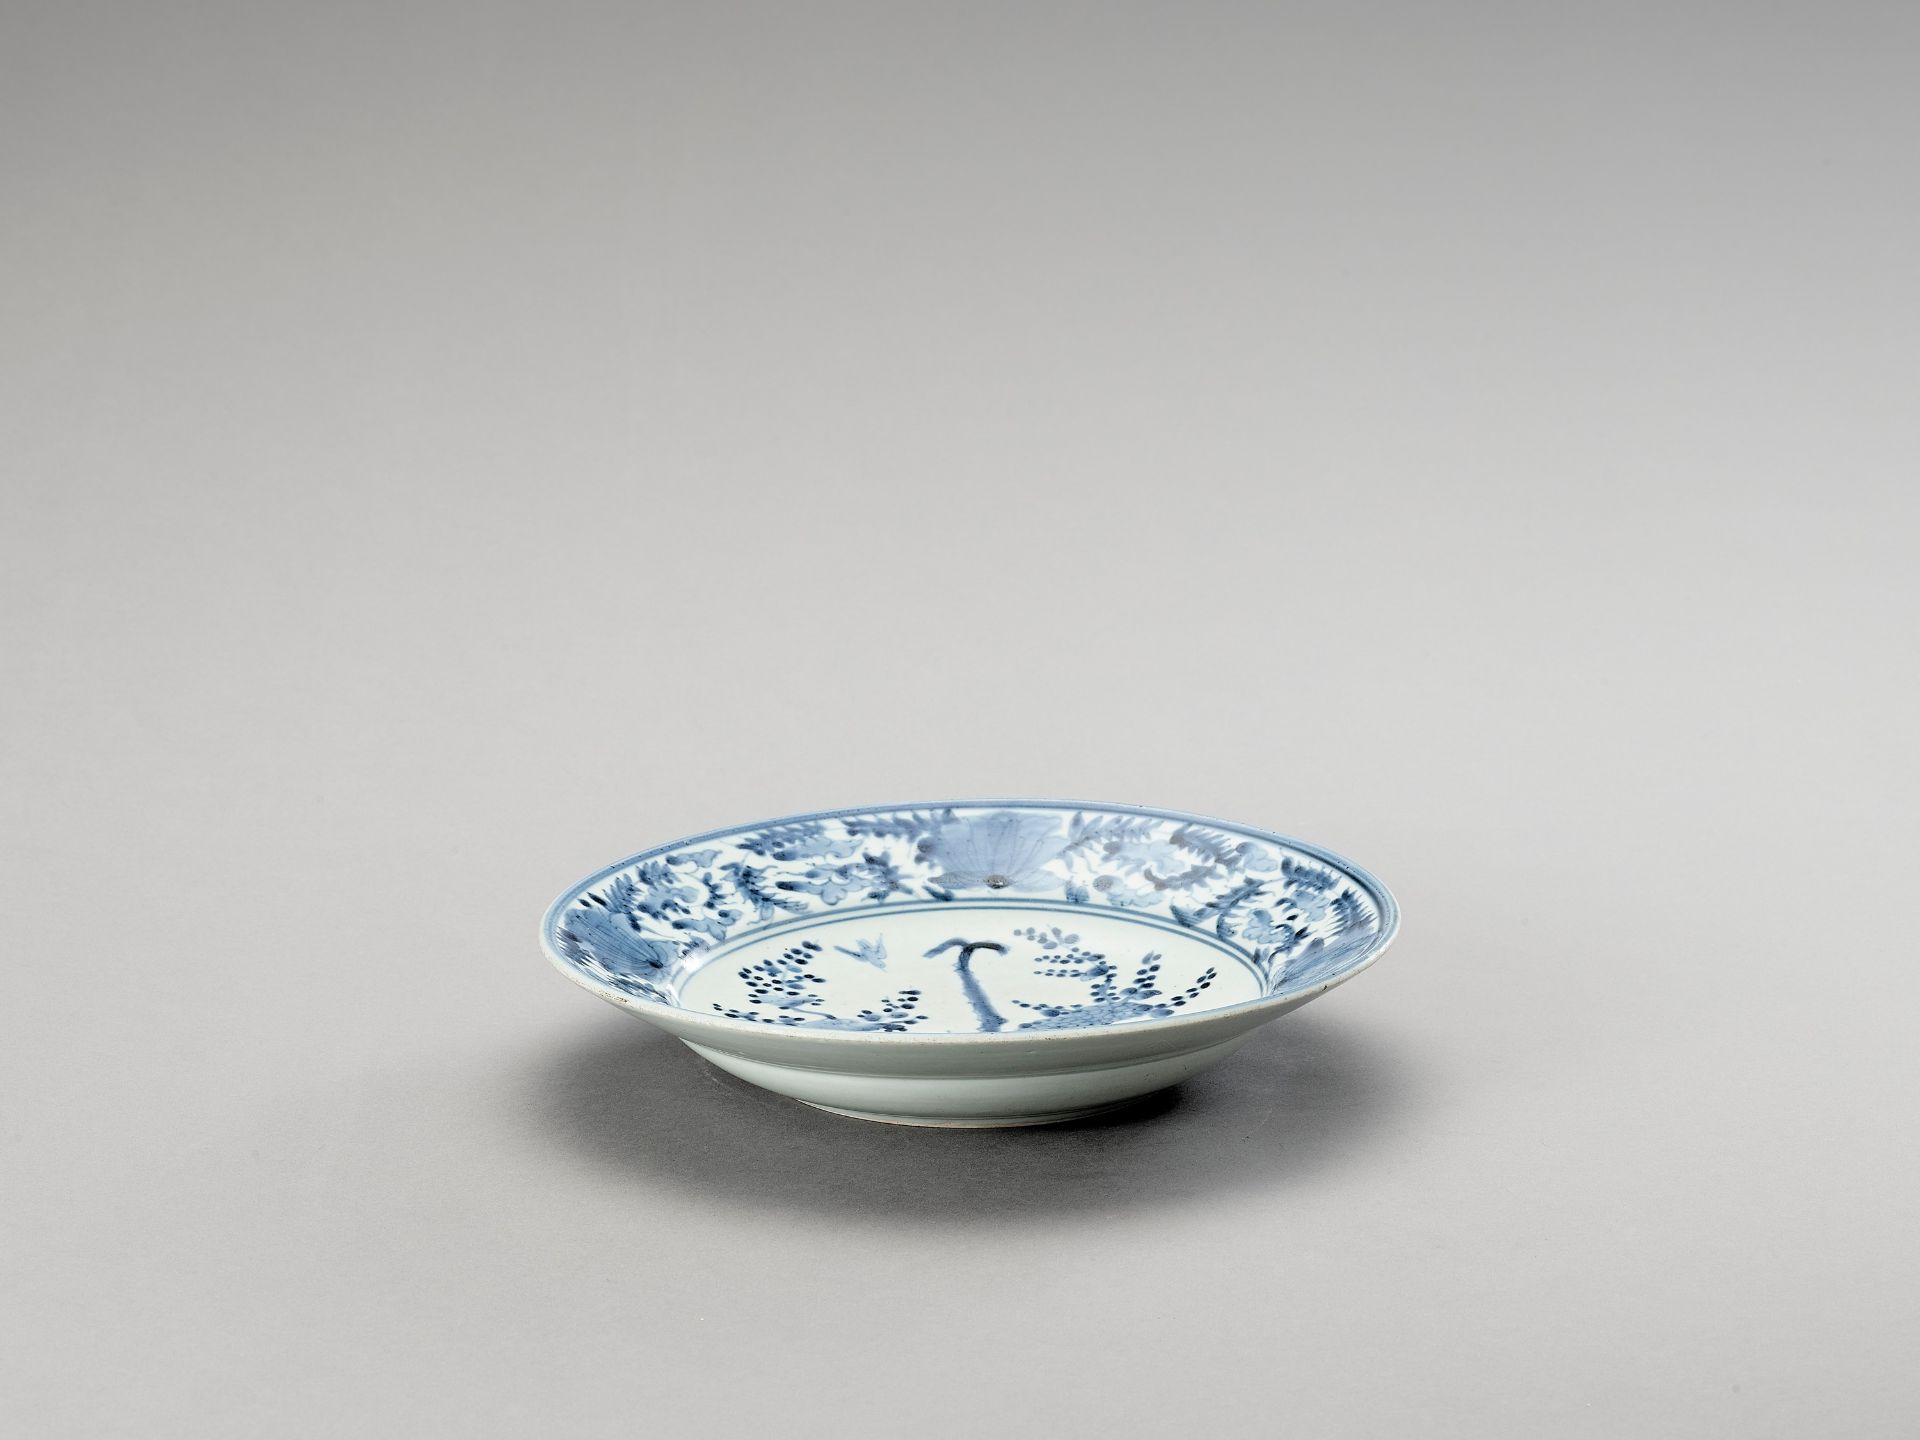 A 'KRAAK' STYLE BLUE AND WHITE PORCELAIN DISH - Image 2 of 5